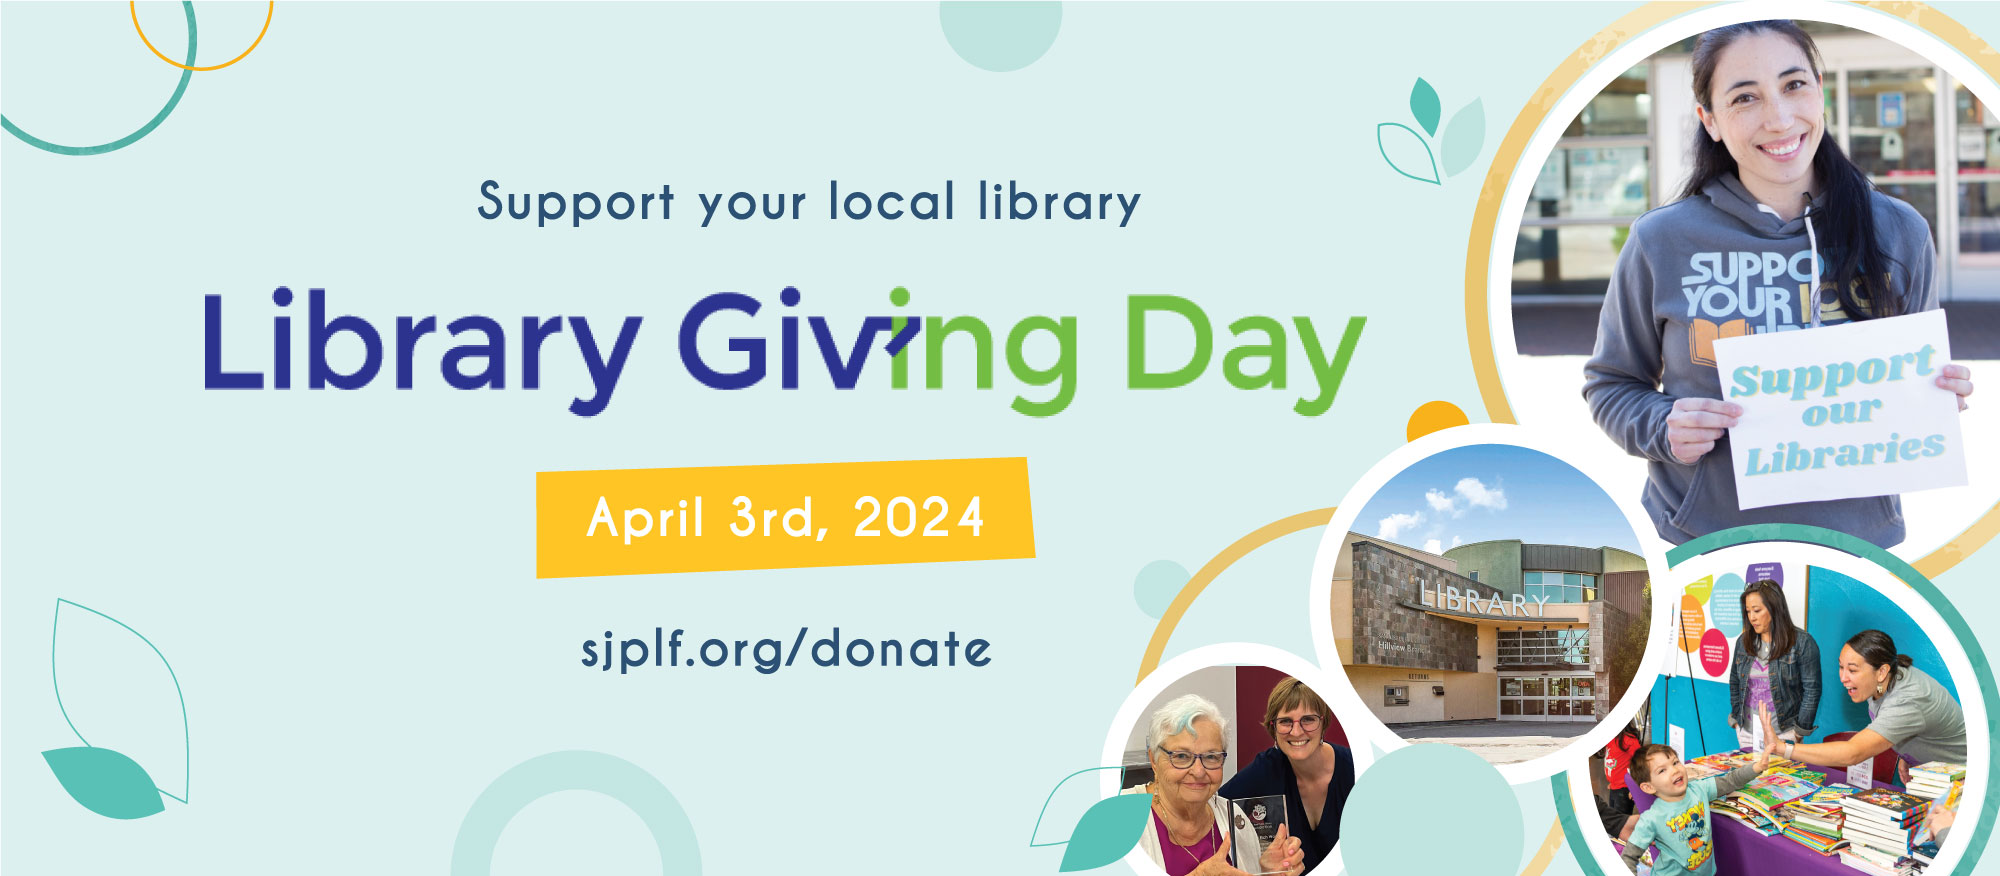 Support your local library this Library Giving Day on April 3rd, 2024! click this image to donate. 